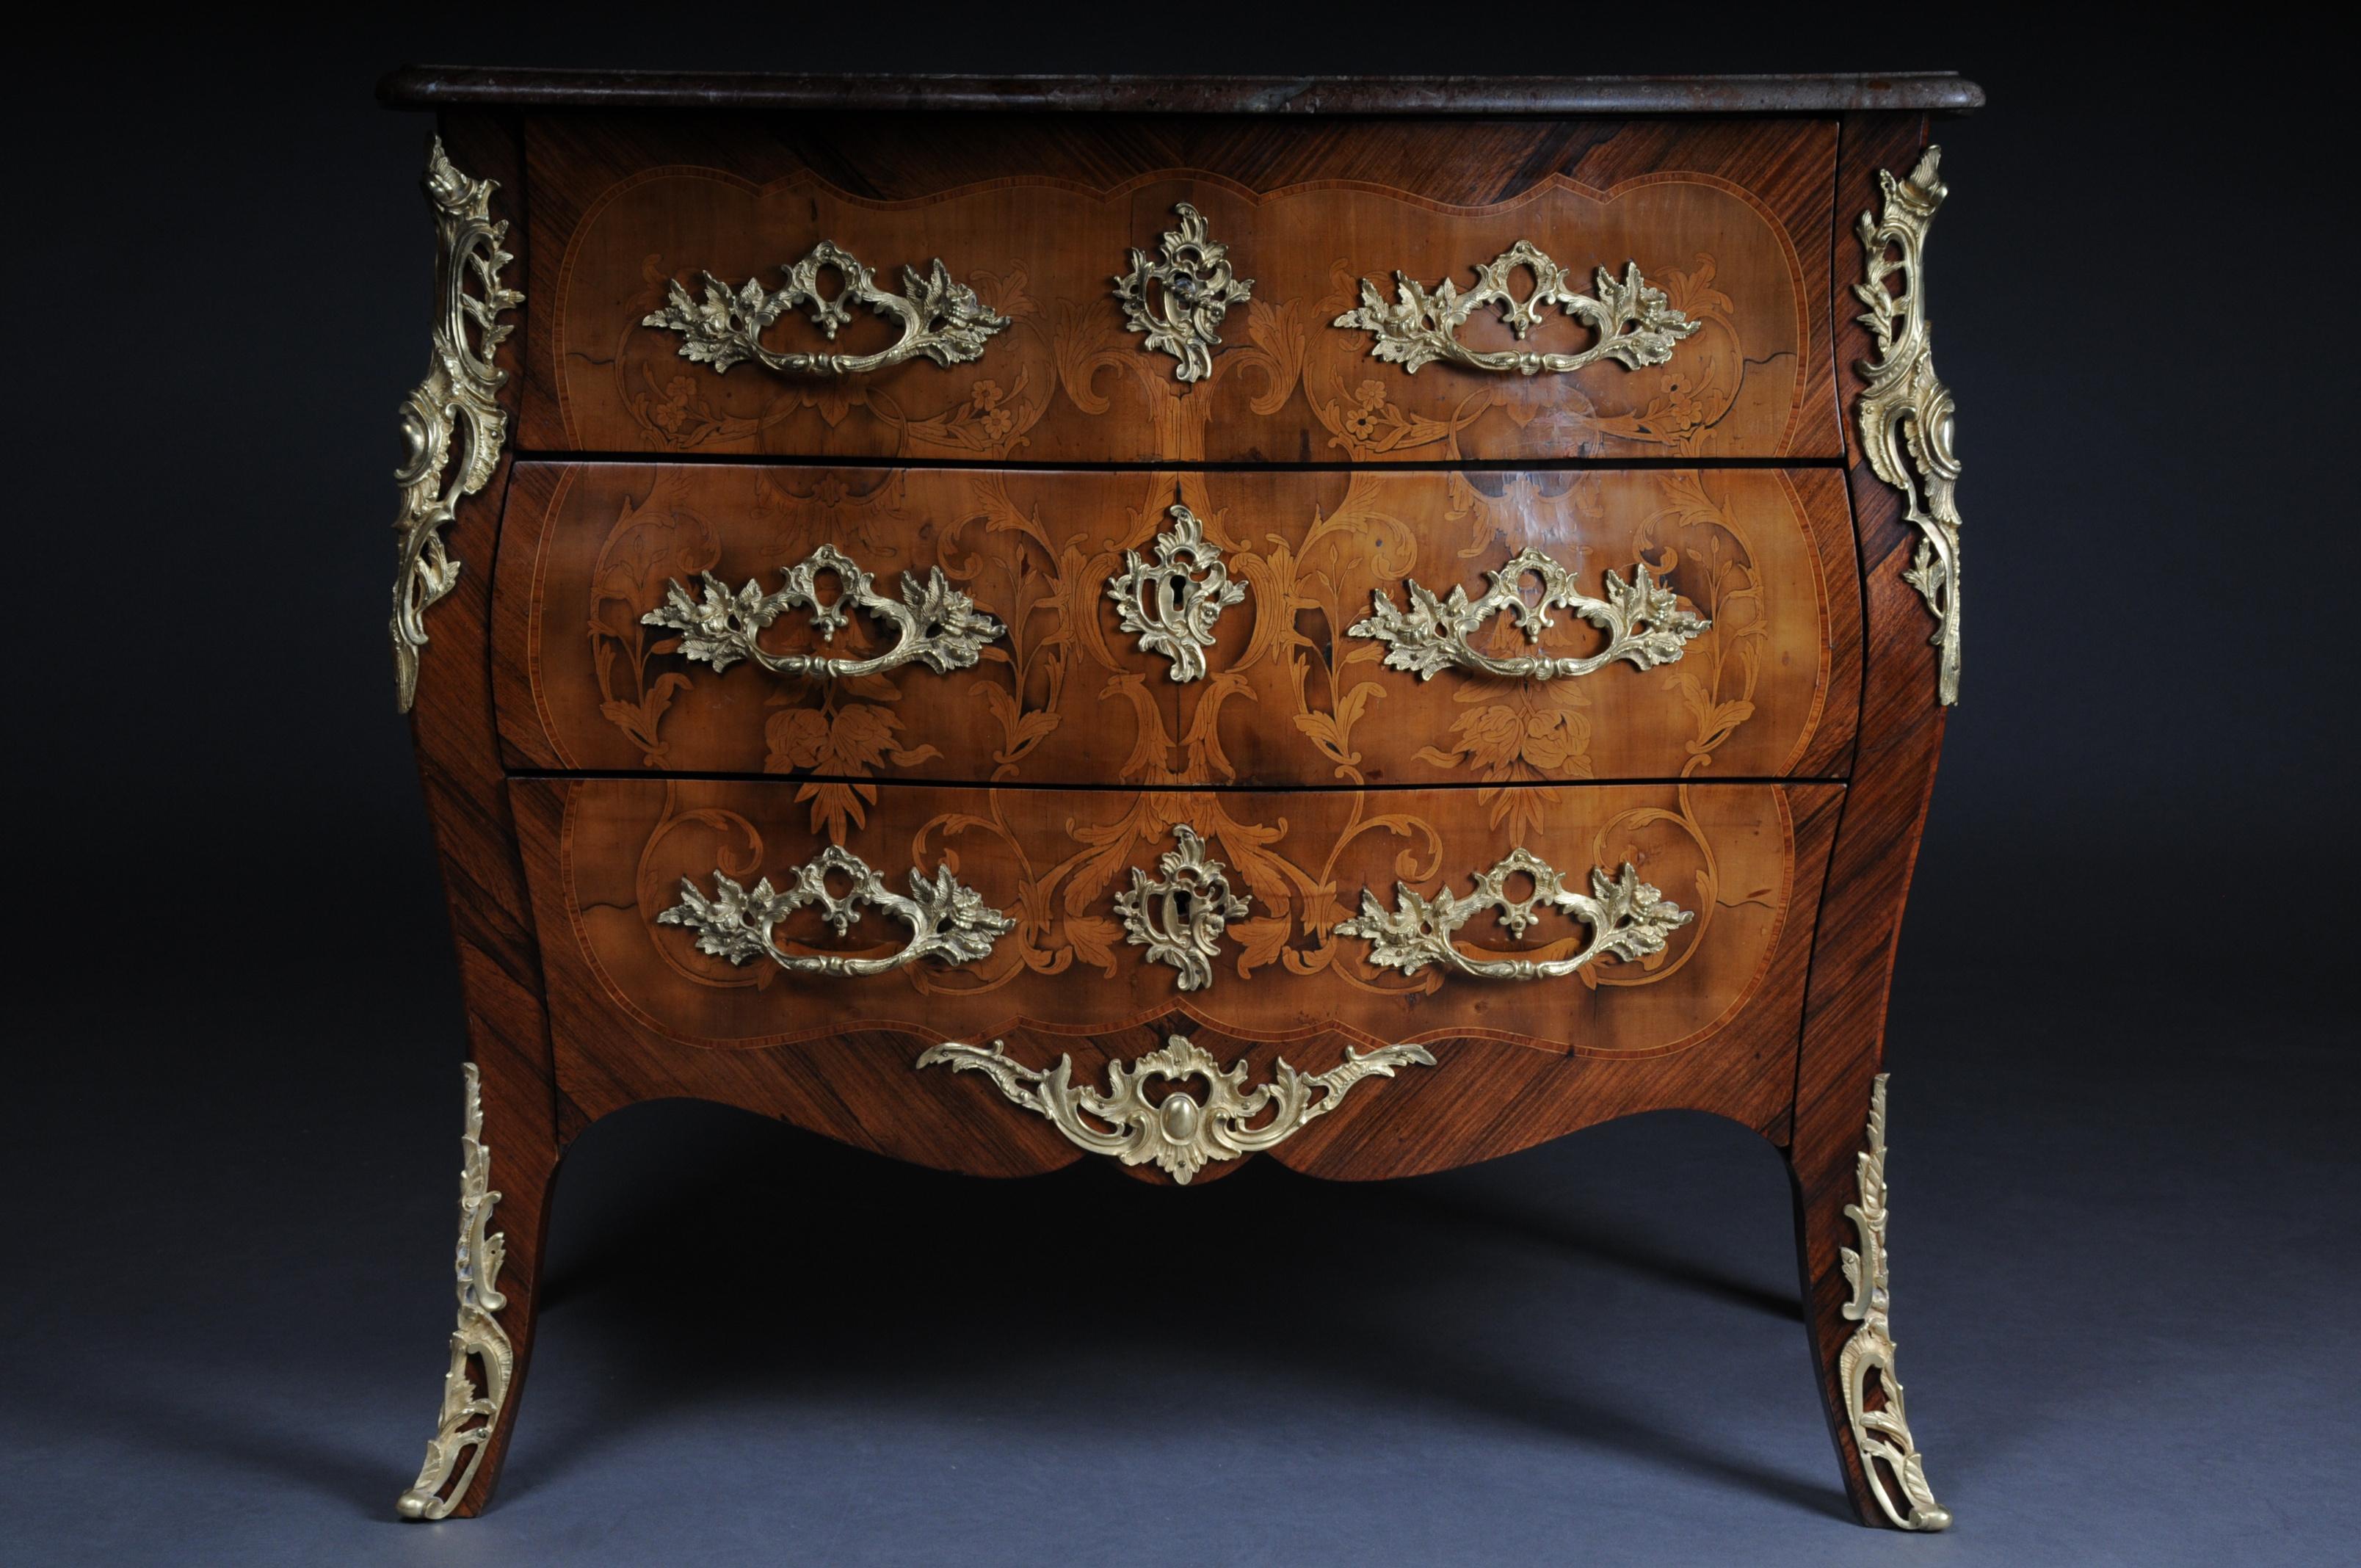 Louis XV style chest of drawers
Tulipwood veneer and maple. Body cambered on all sides with protruding corners. On both sides and front over the three drawers, market decorations made of acanthus volutes, rocaille and flower curtains. Fire-gilt